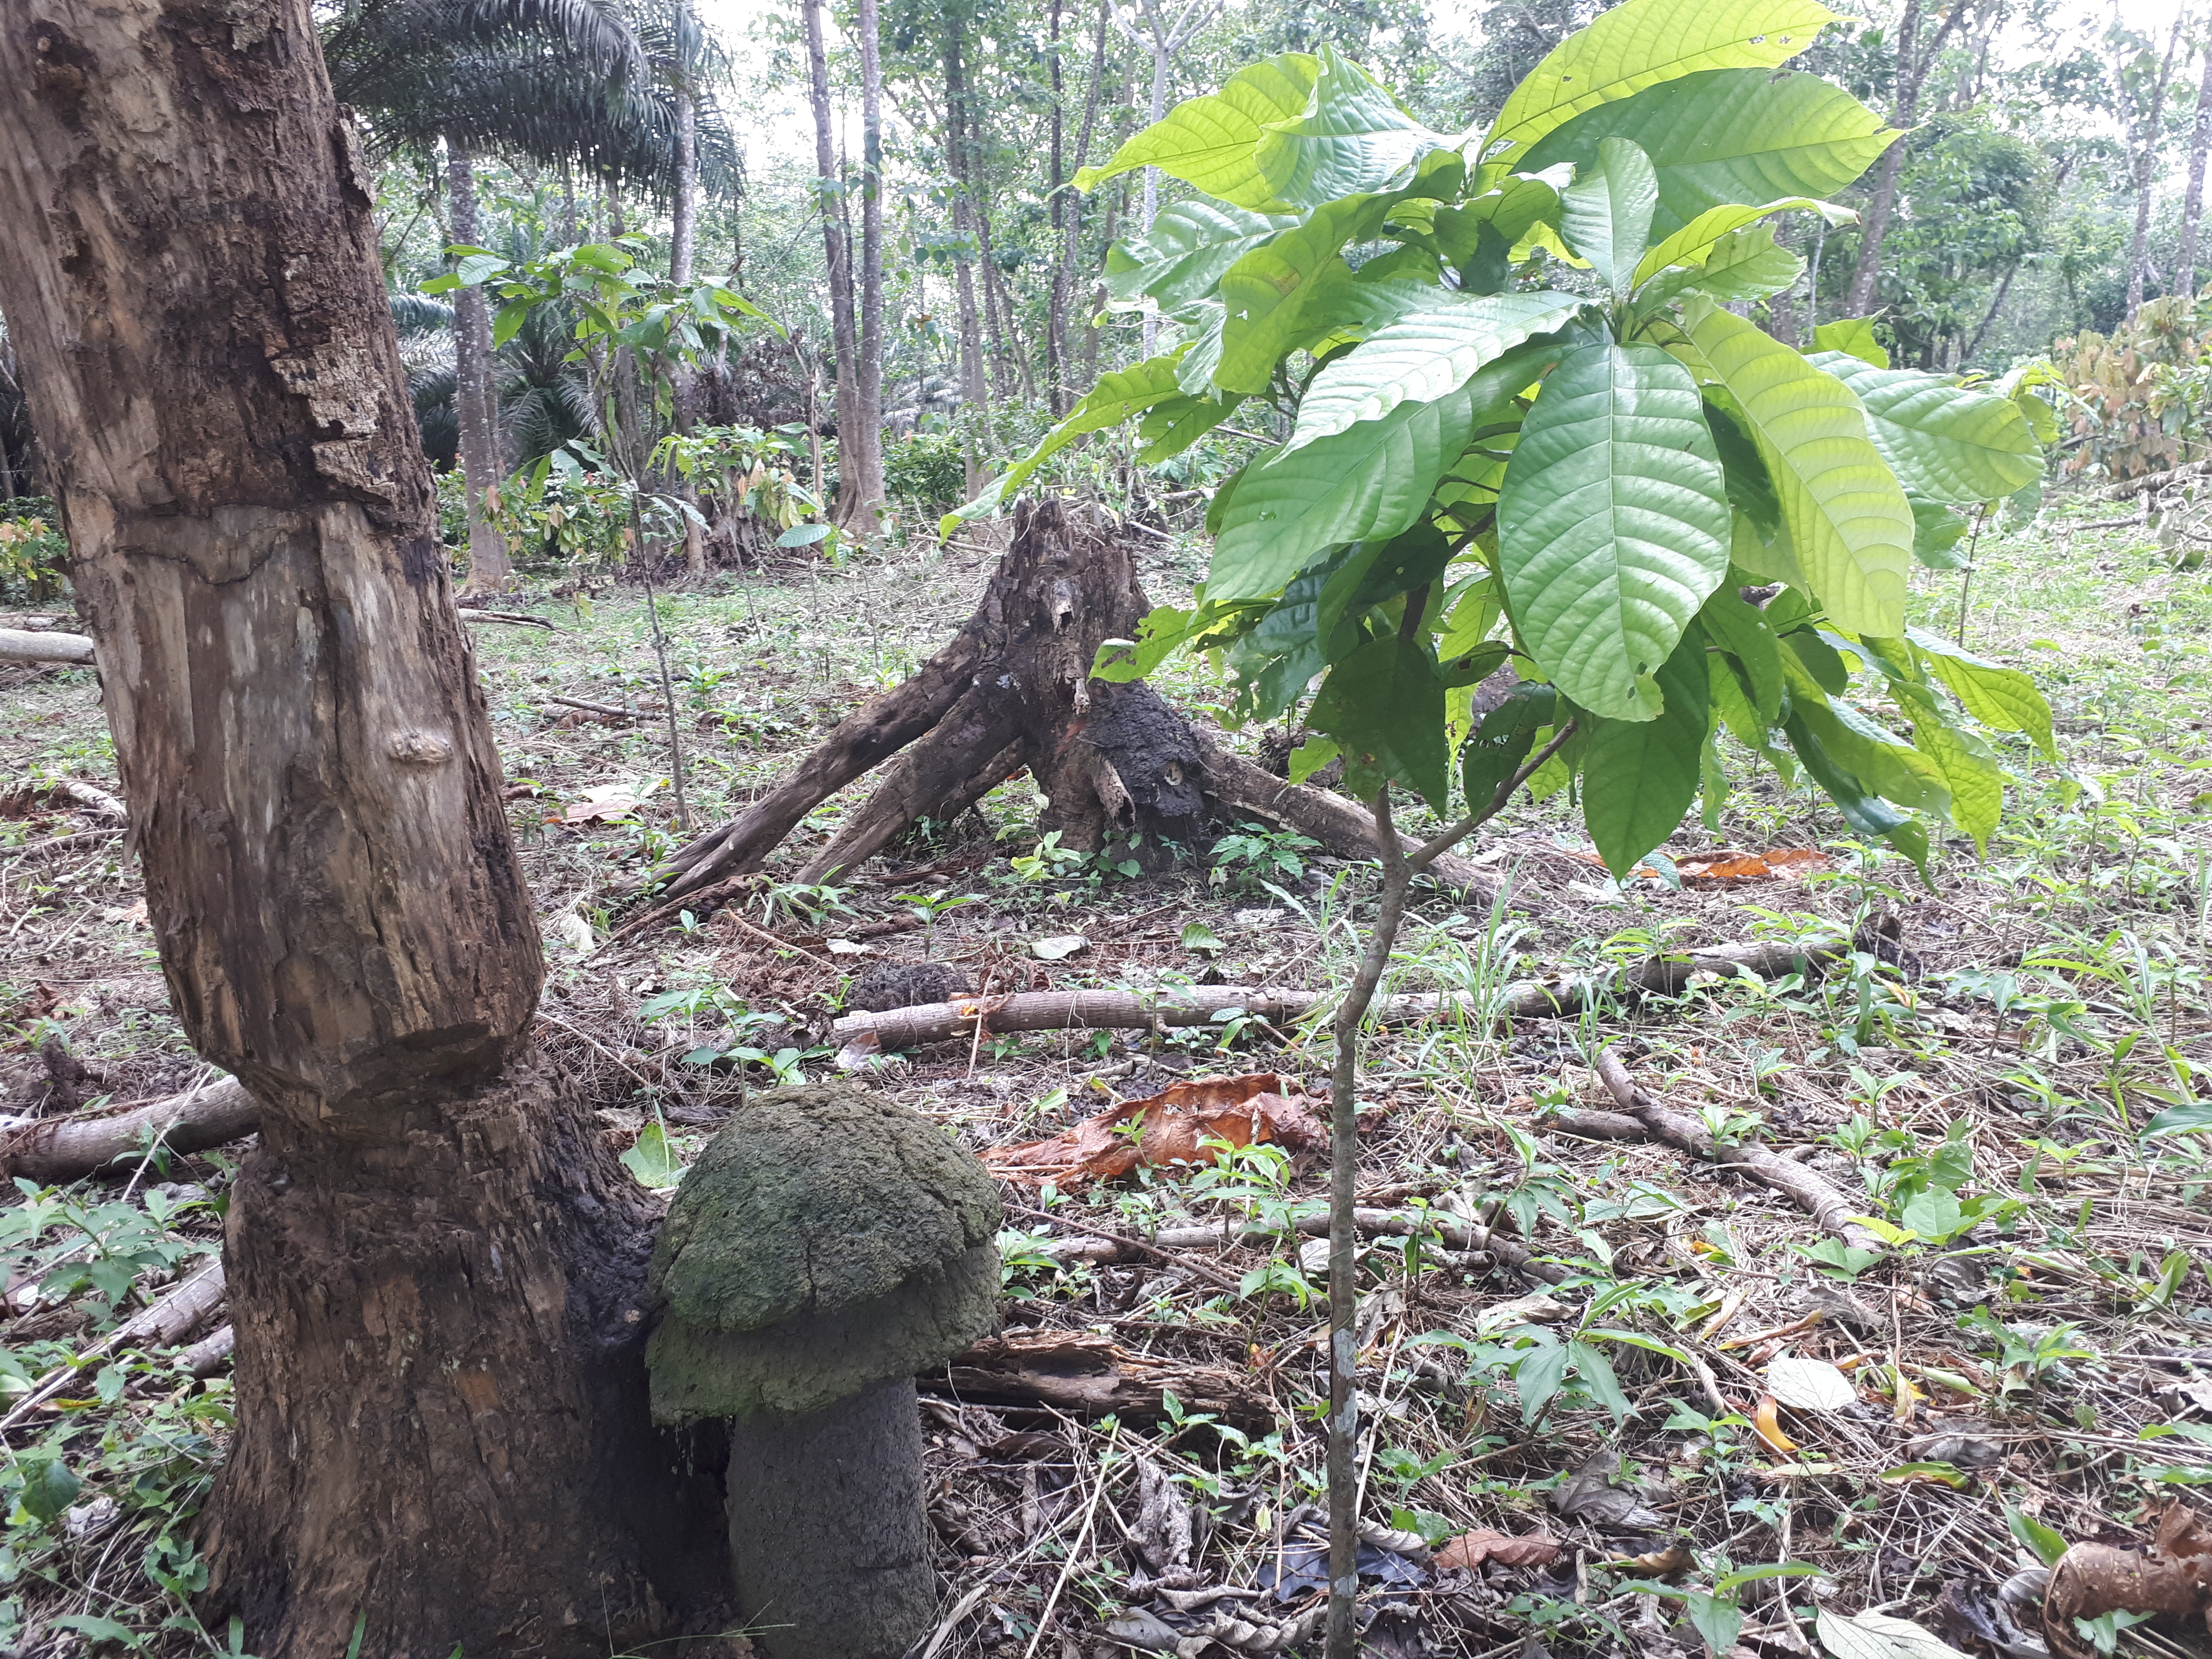 Smallholder farmers debarked trees and cleared forests to plant new cocoa in West Africa